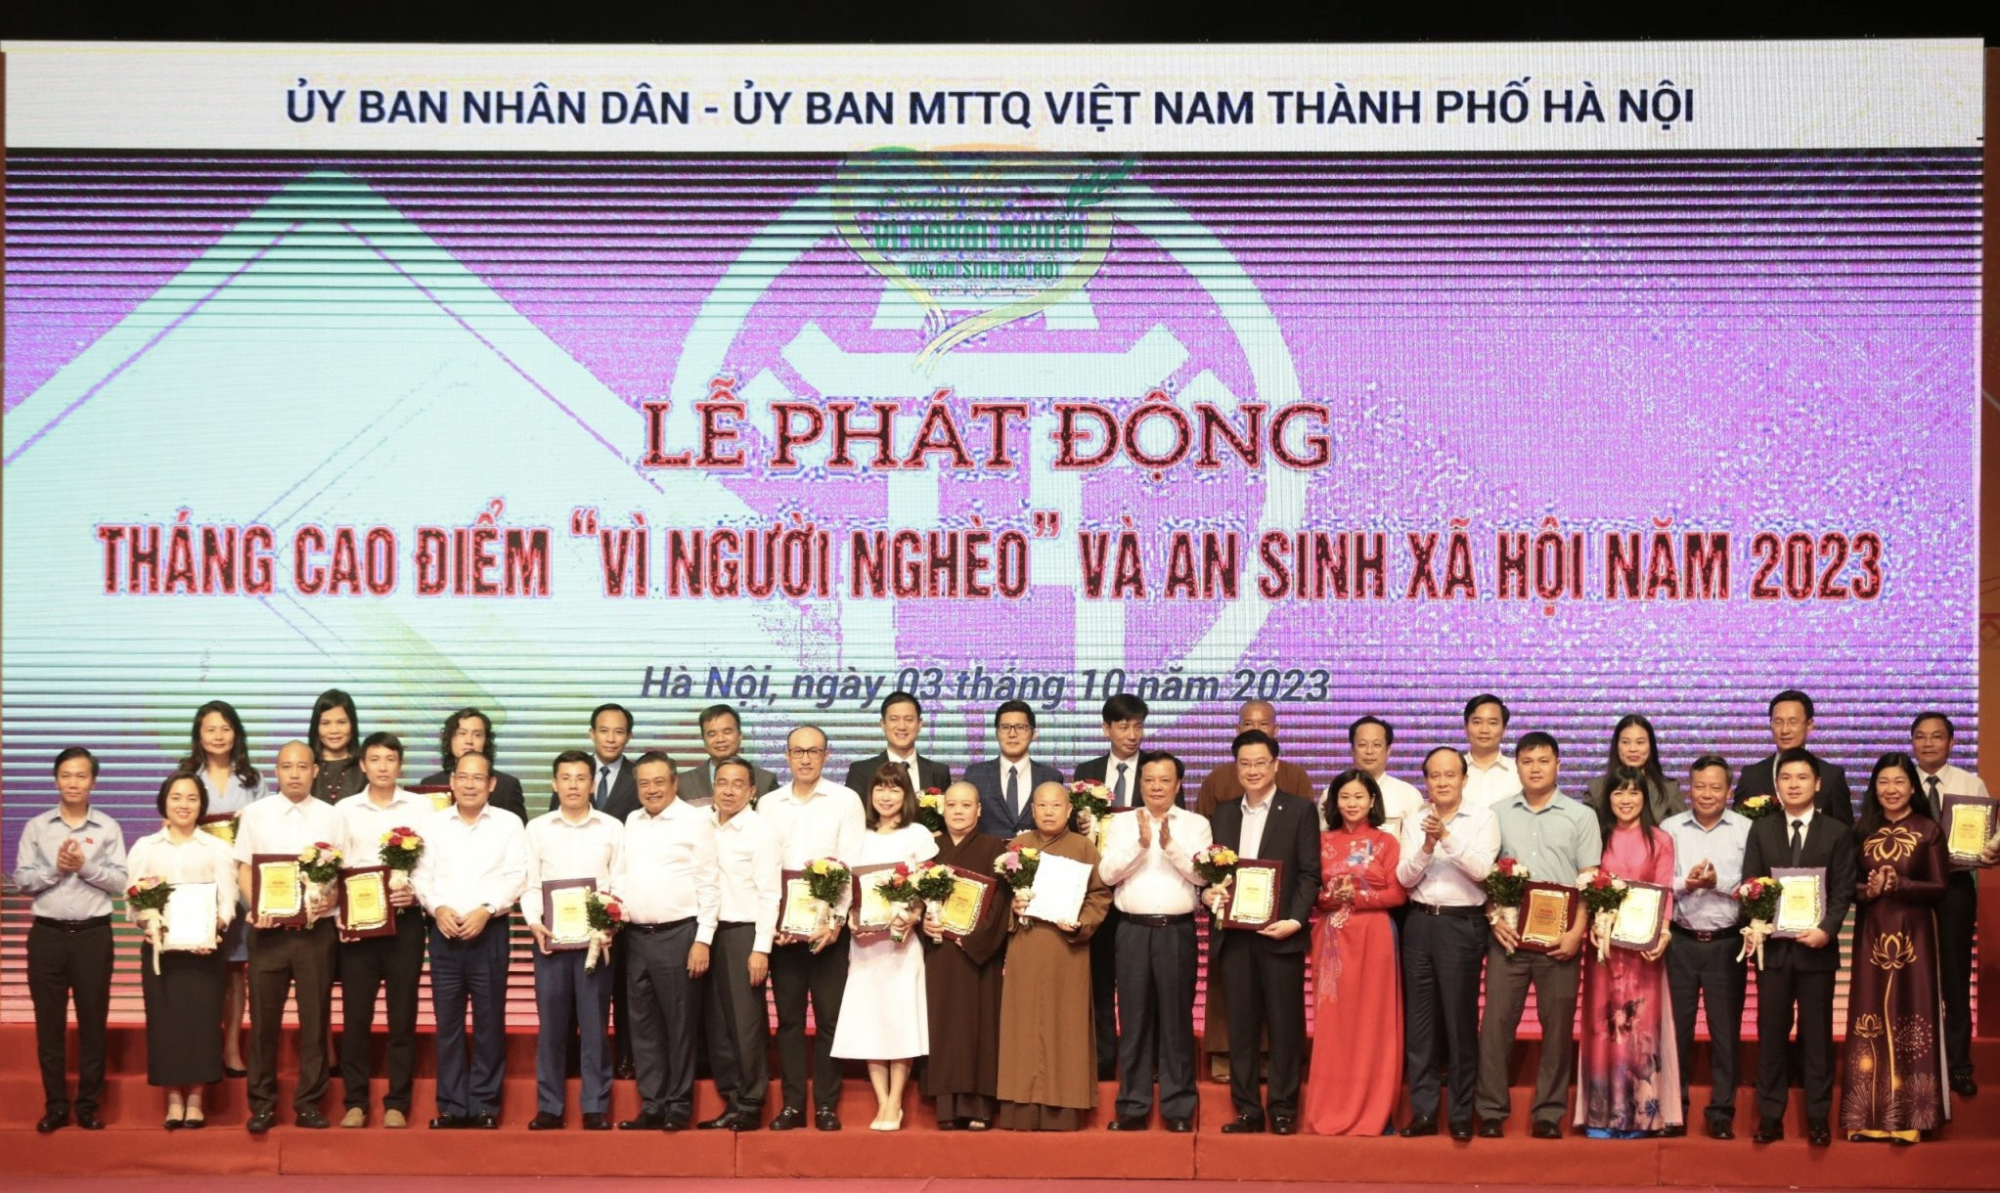 tt group ung ho 1 ty dong cho quy vi nguoi ngheo thanh pho ha noi hinh 3